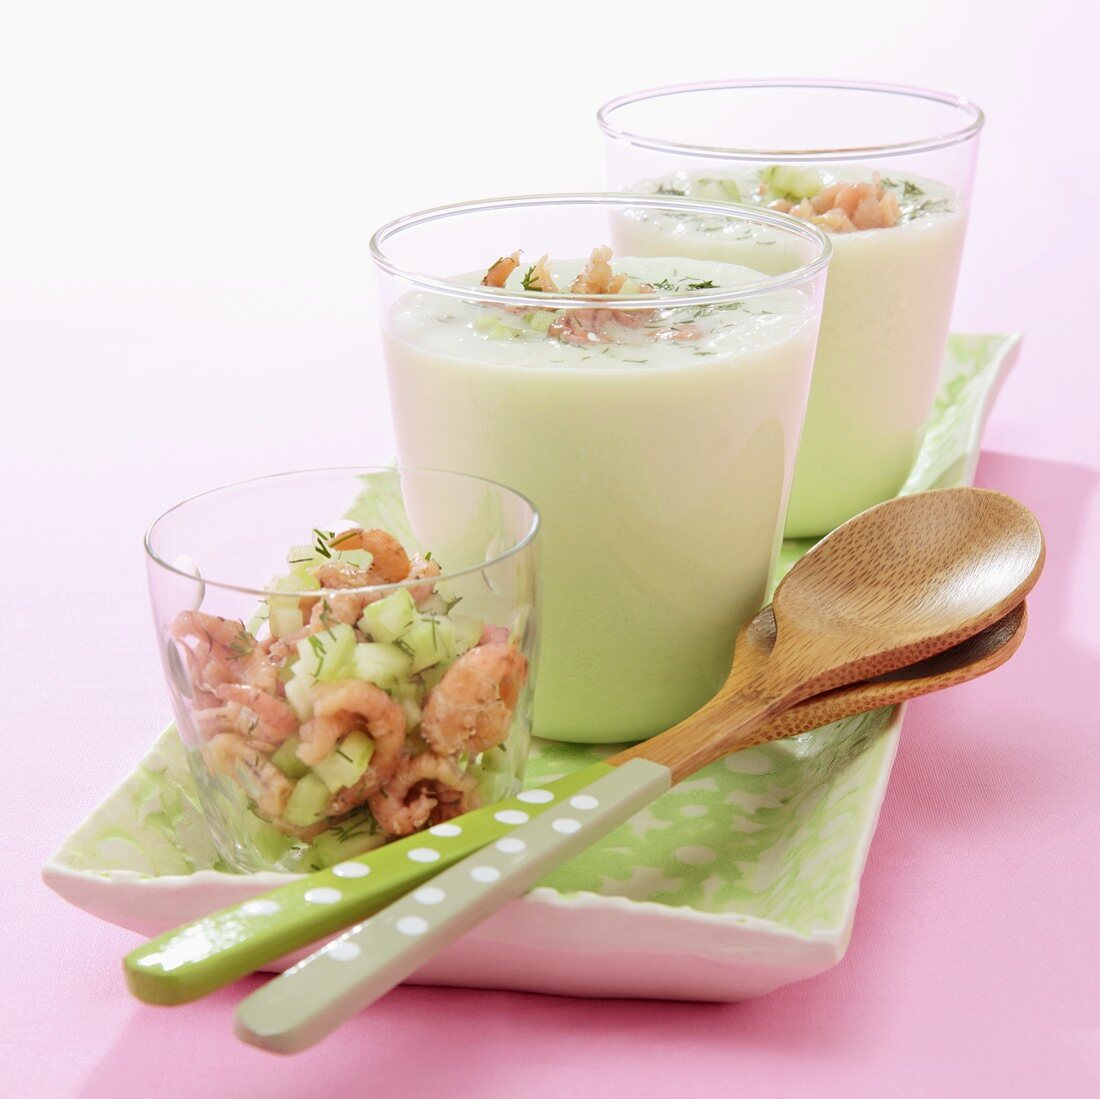 Cold cucumber soup with North Sea shrimps